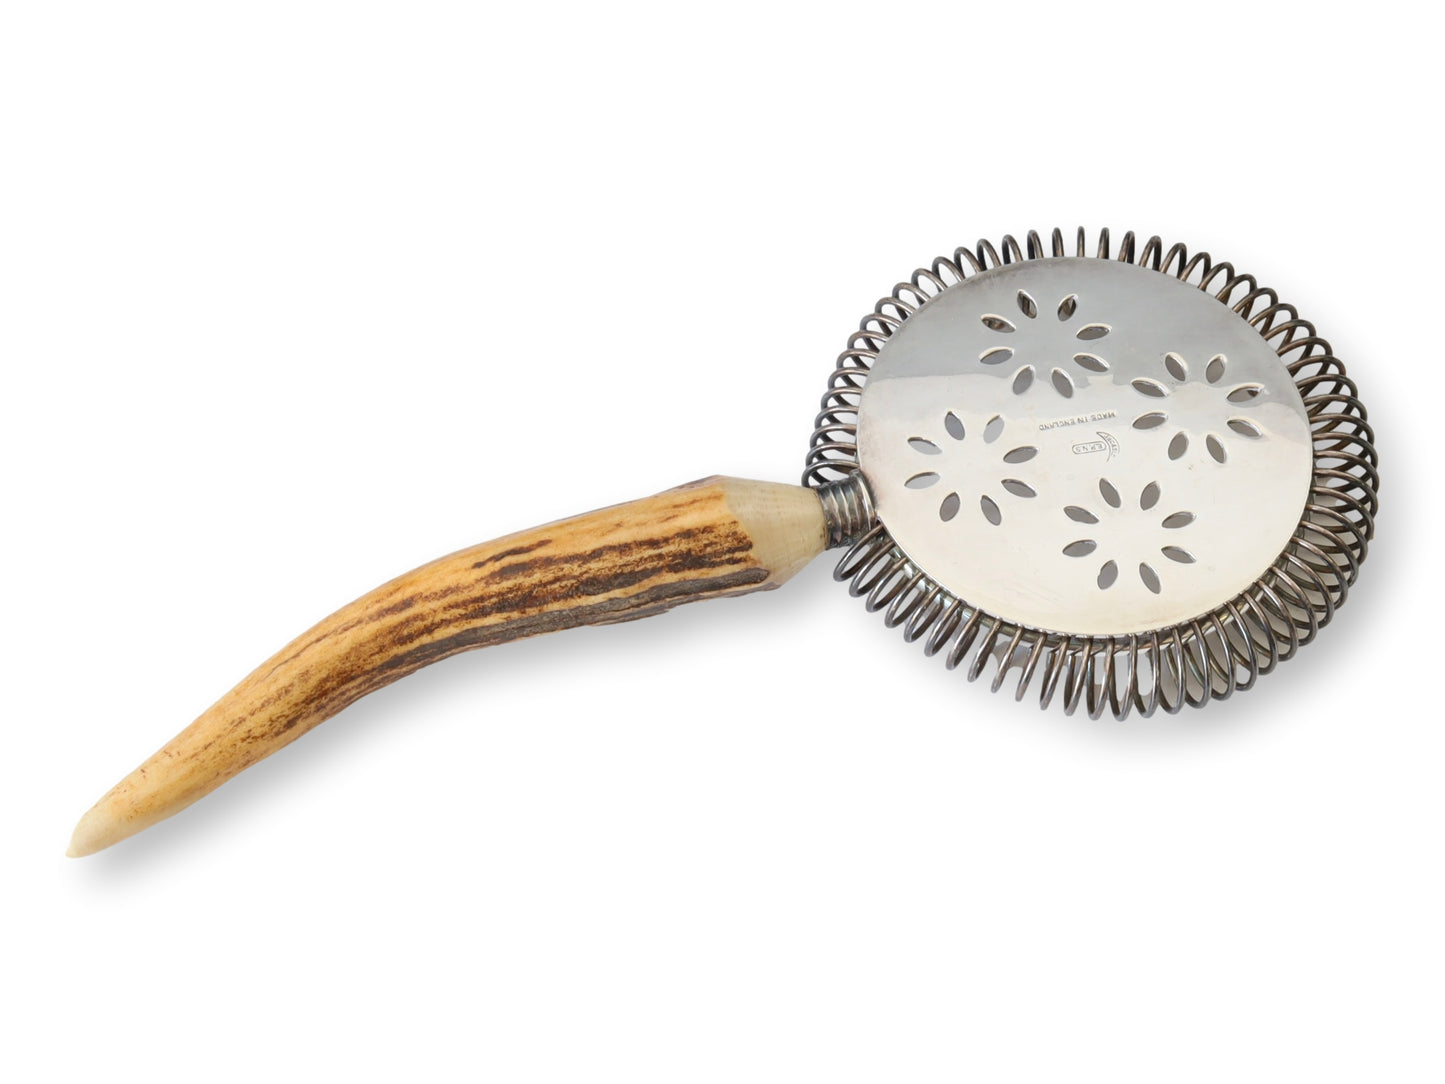 English Stag Horn Cocktail Strainer